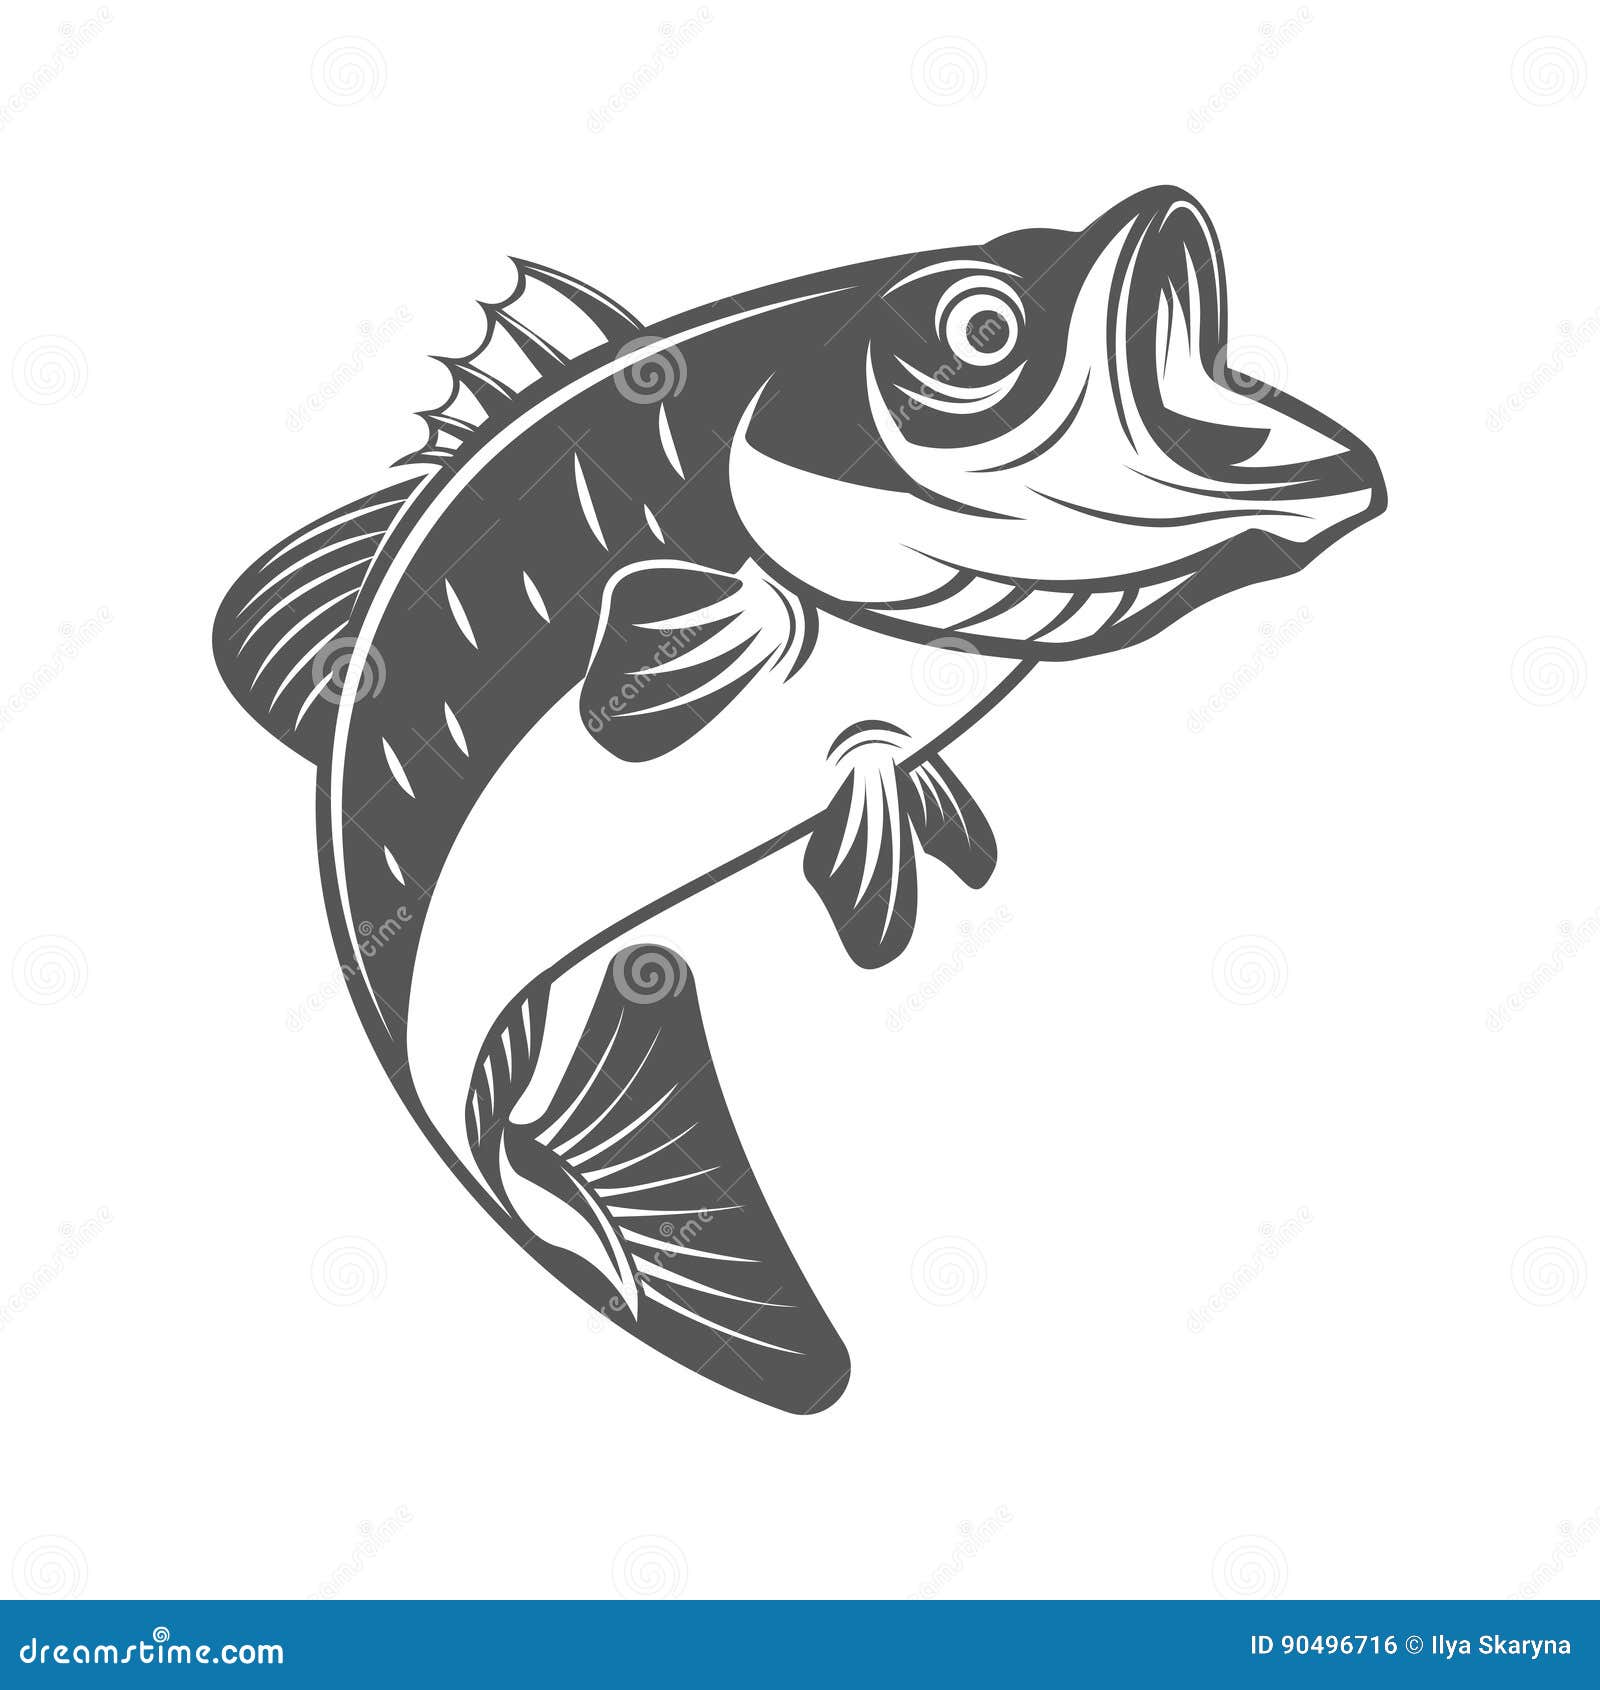 Download Bass Fish Vector Illustration In Monochrome Vintage Style ...